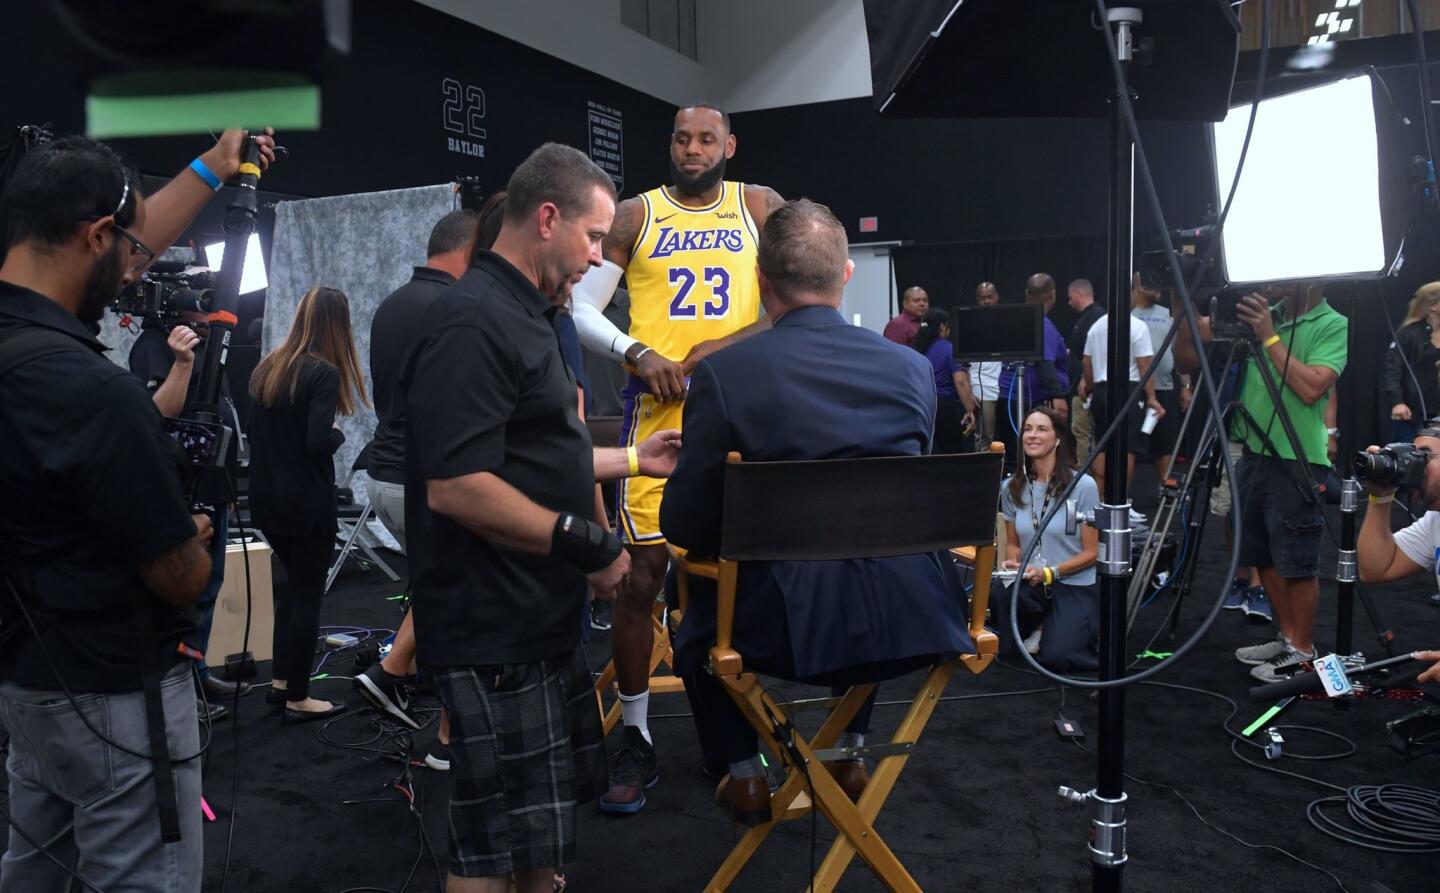 Lakers Media Day